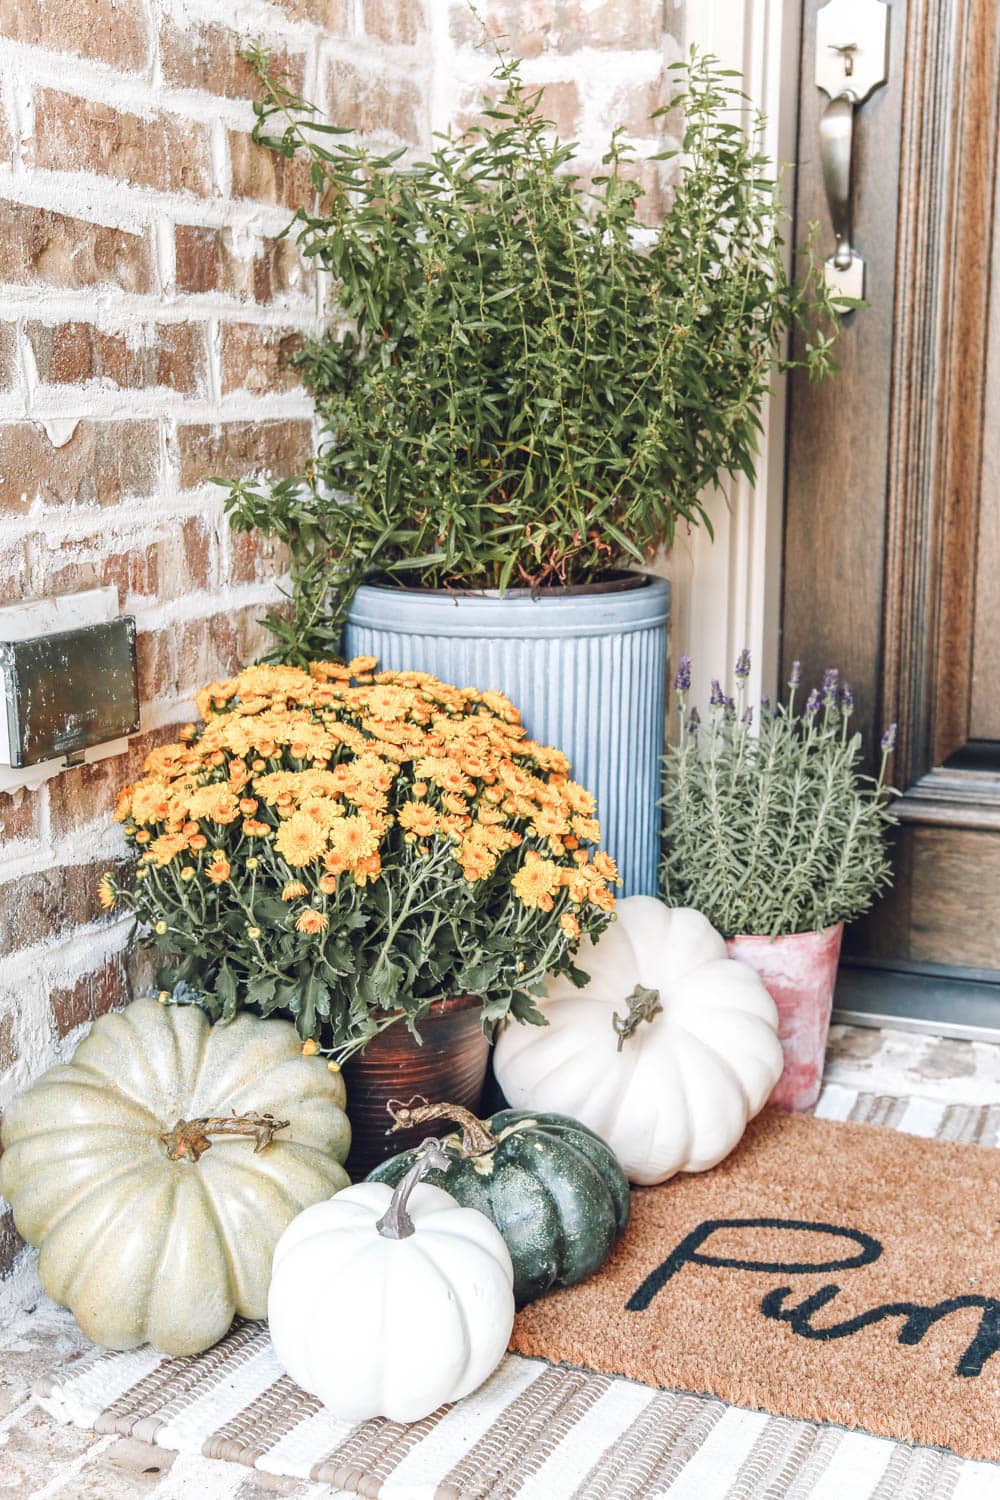 Fall porch details, mums, pumpkins, lavender plants, striped area rug layered with Hey There Pumpkin door mat. Fall decor, fall inspiration. #ABlissfulNest #falldecor #fallinspiration